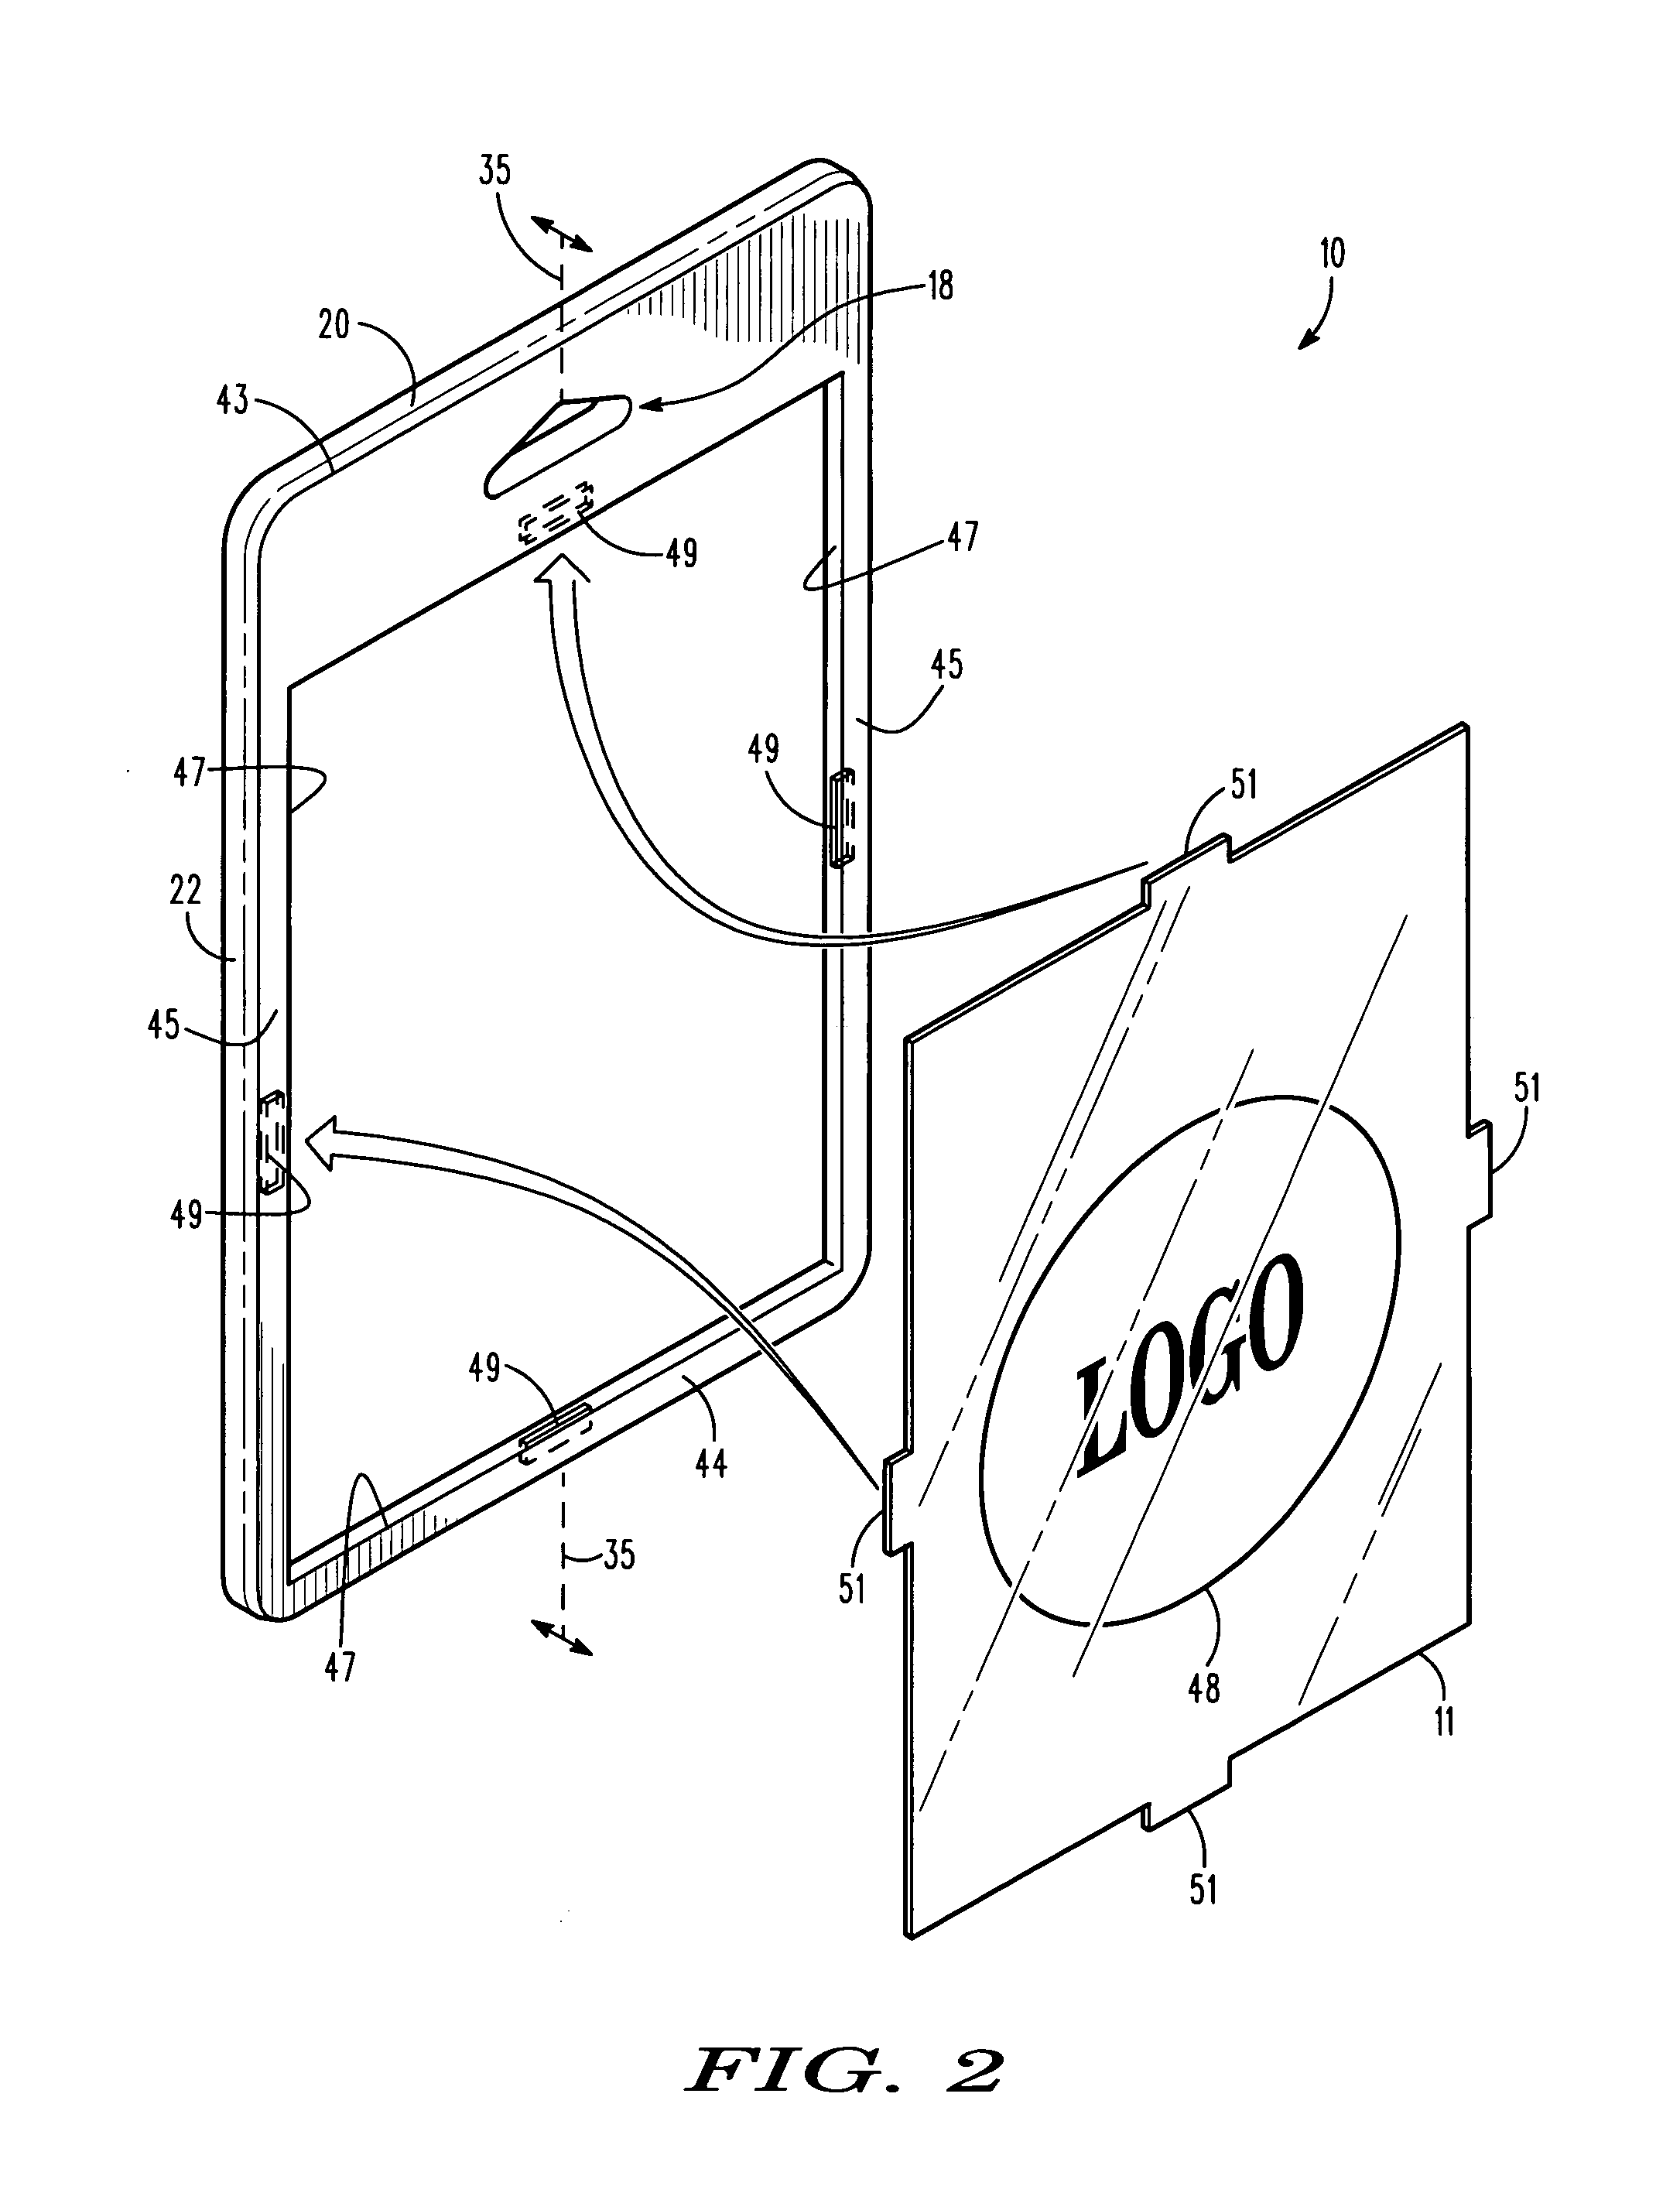 Low profile graphic display device and method